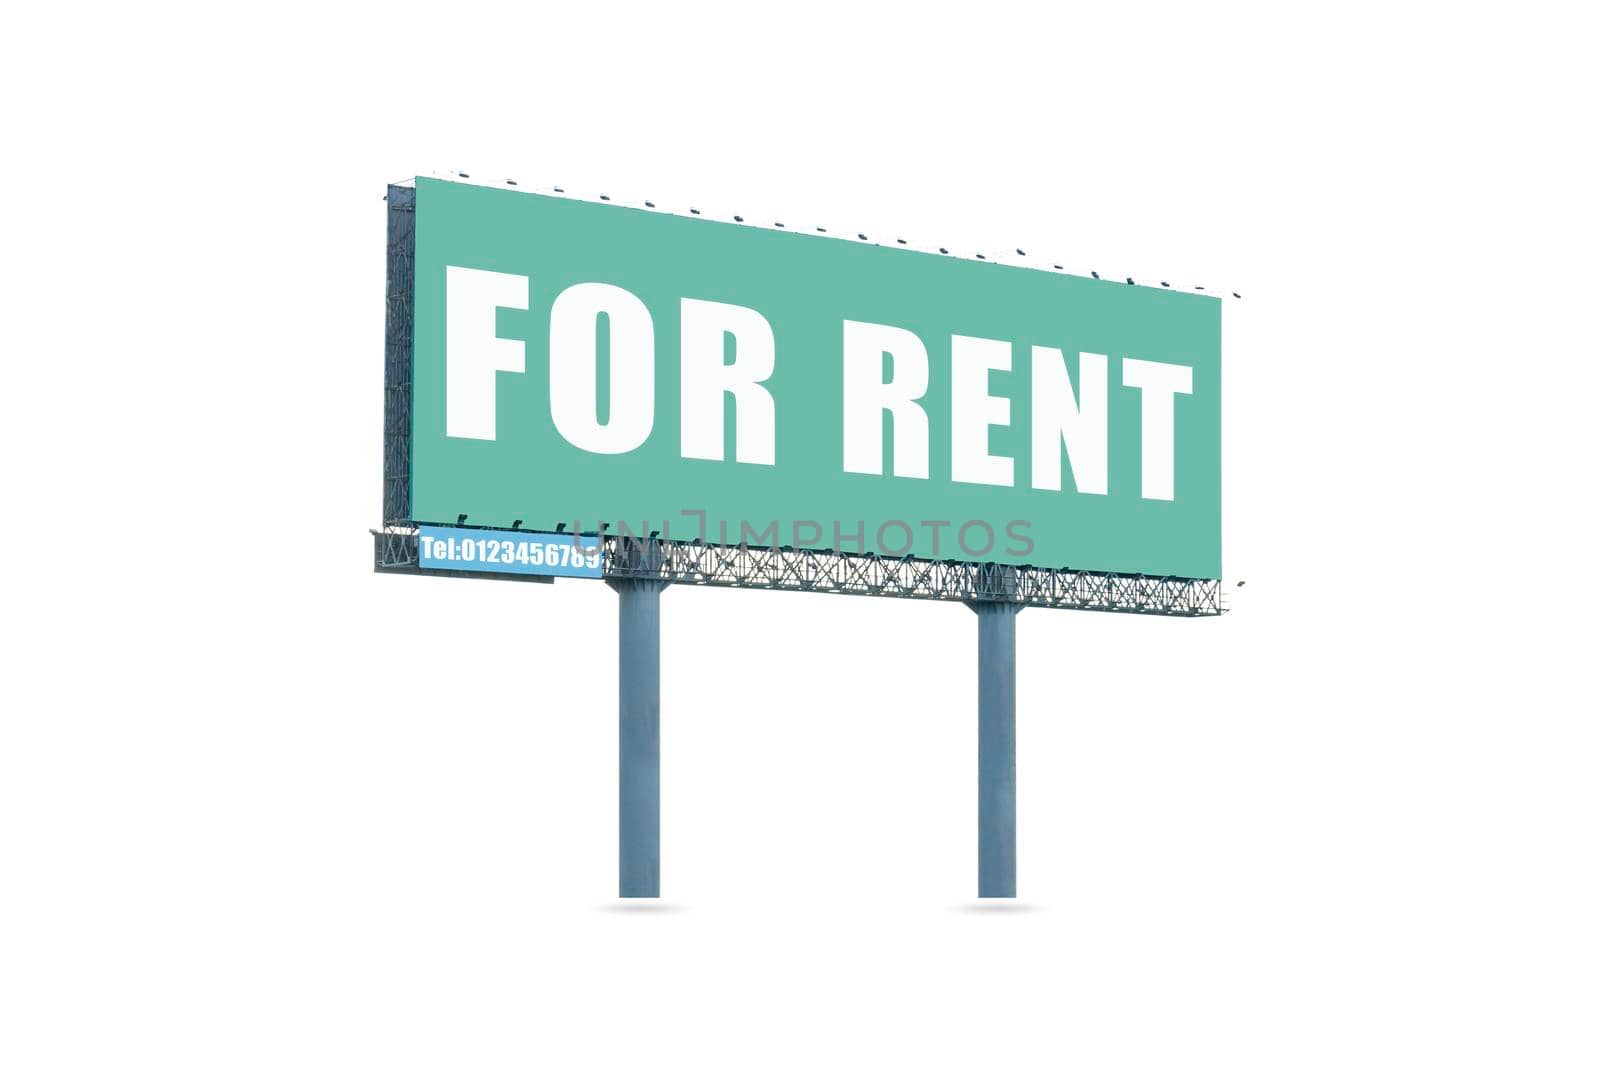 Large blank billboard for rent on white background. by wattanaphob